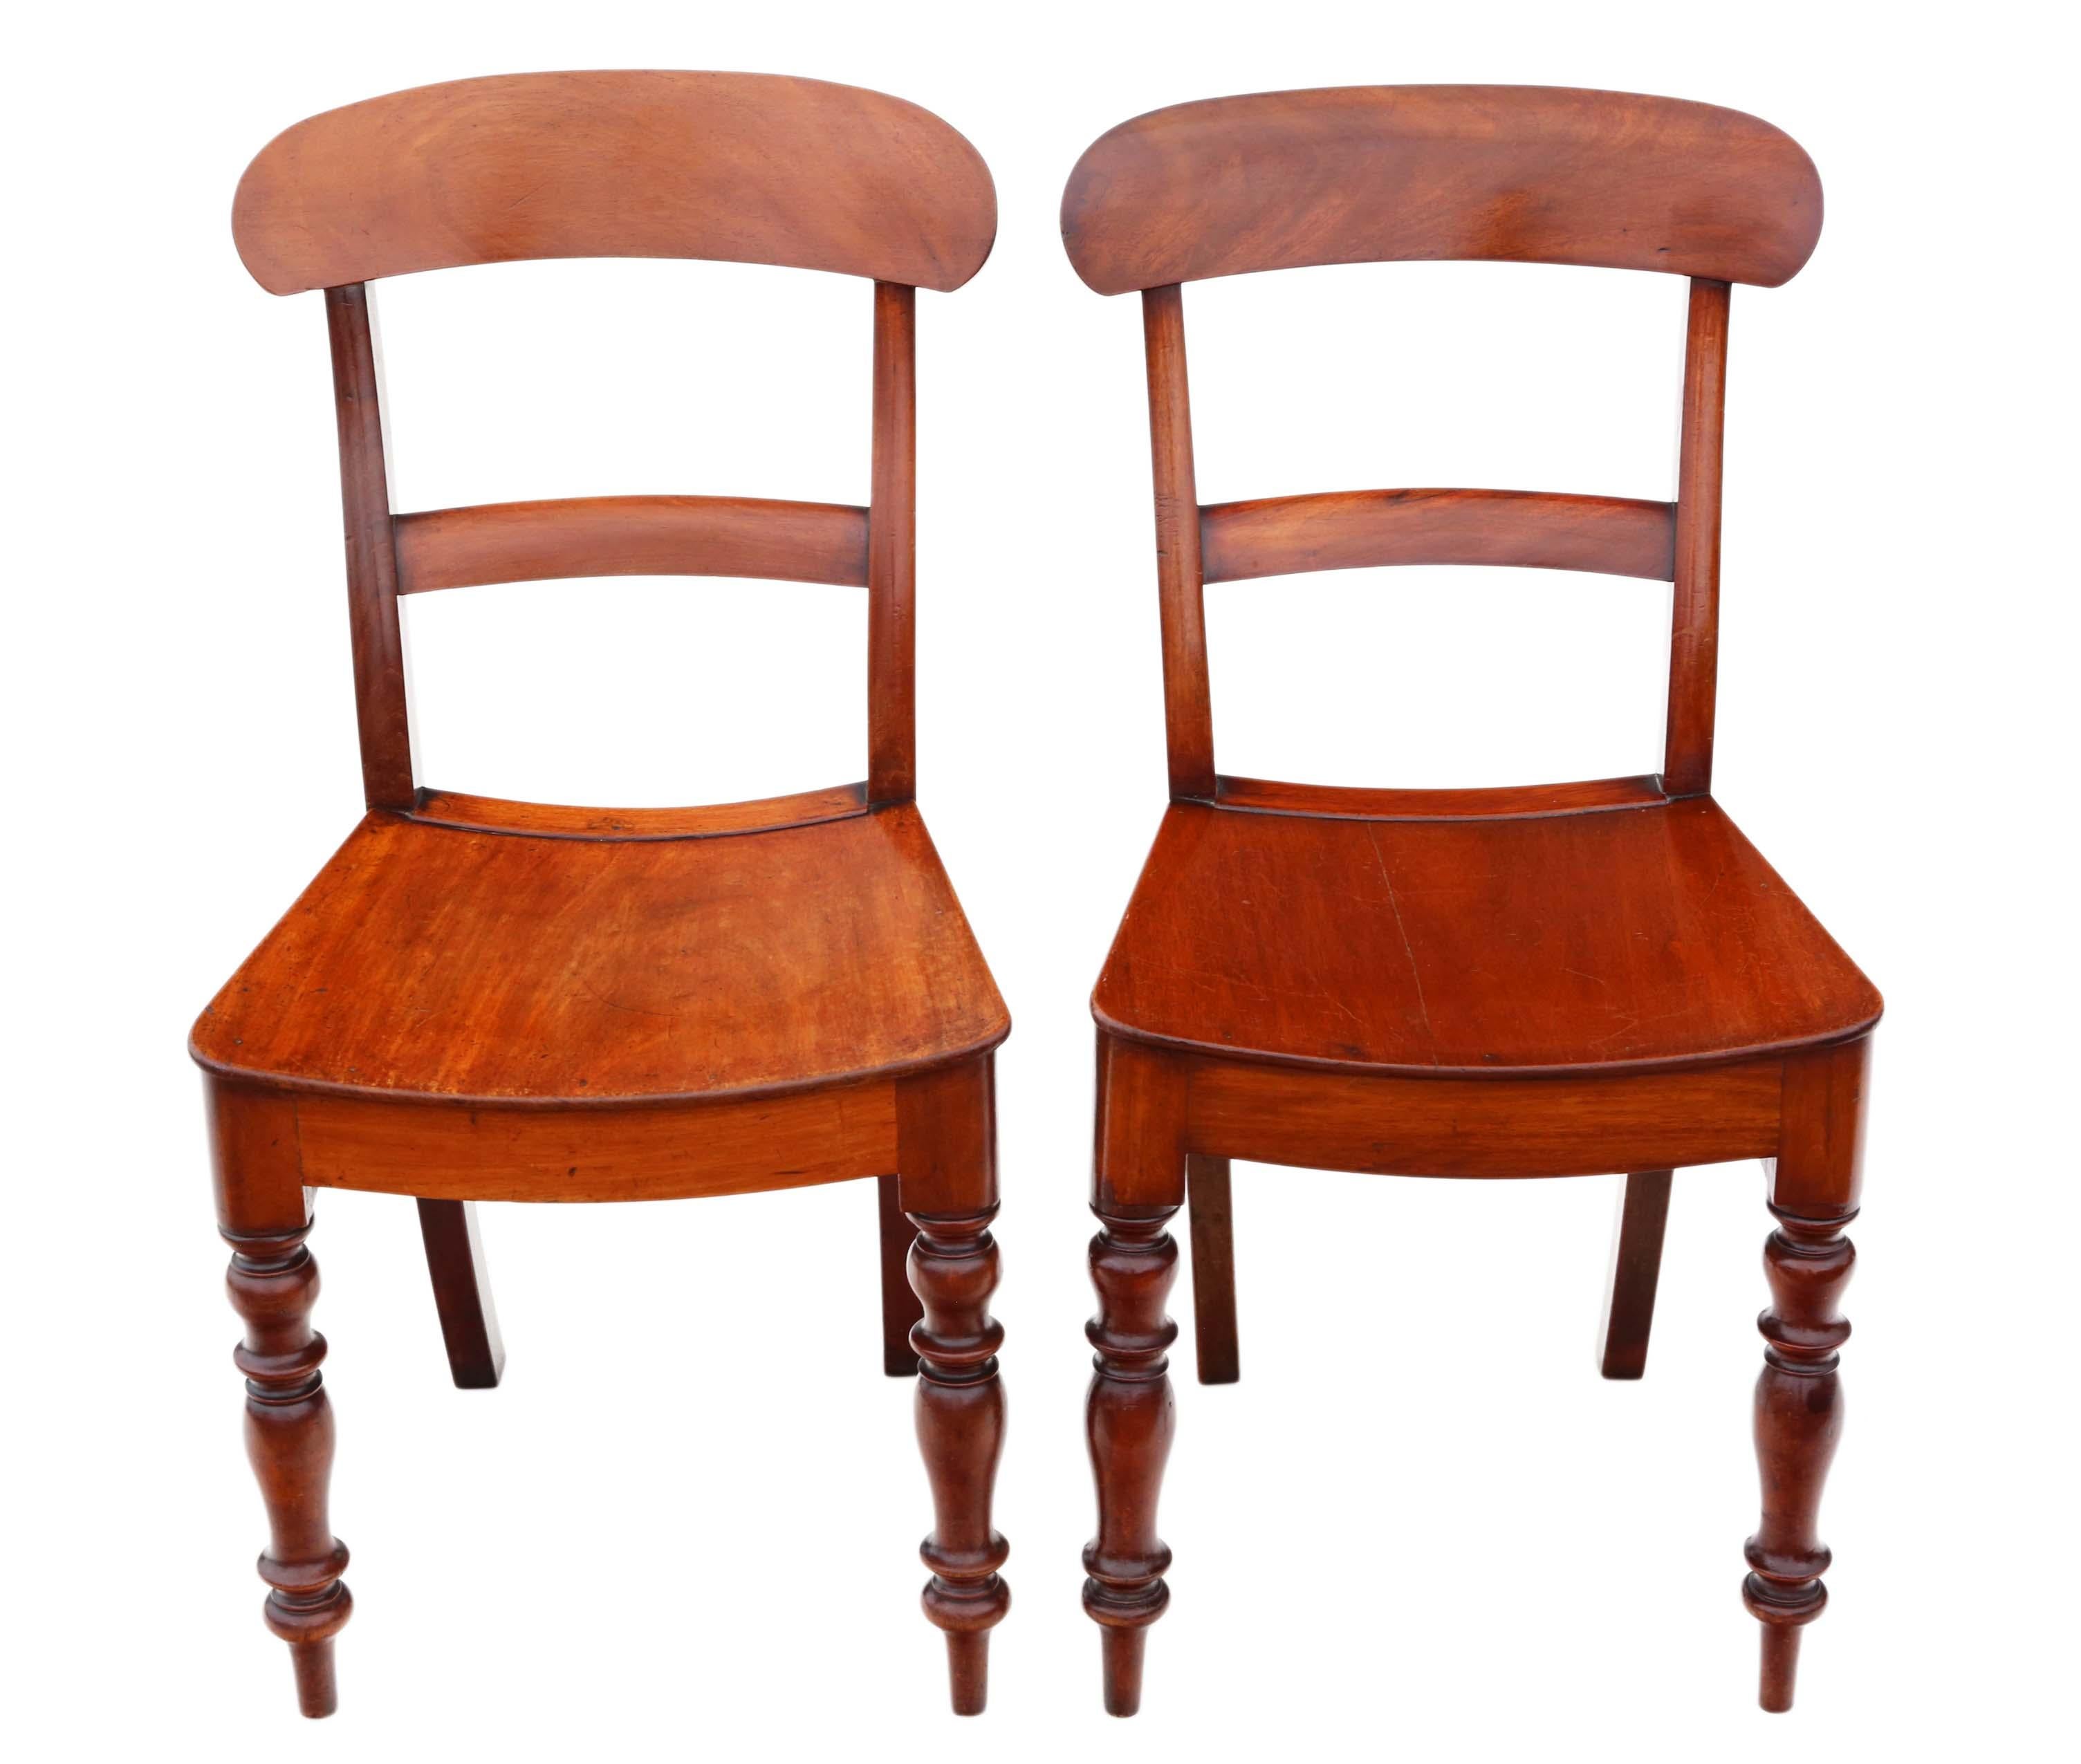 Set of 8 19th Century Mahogany Dining Chairs - Antique Quality In Good Condition For Sale In Wisbech, Cambridgeshire